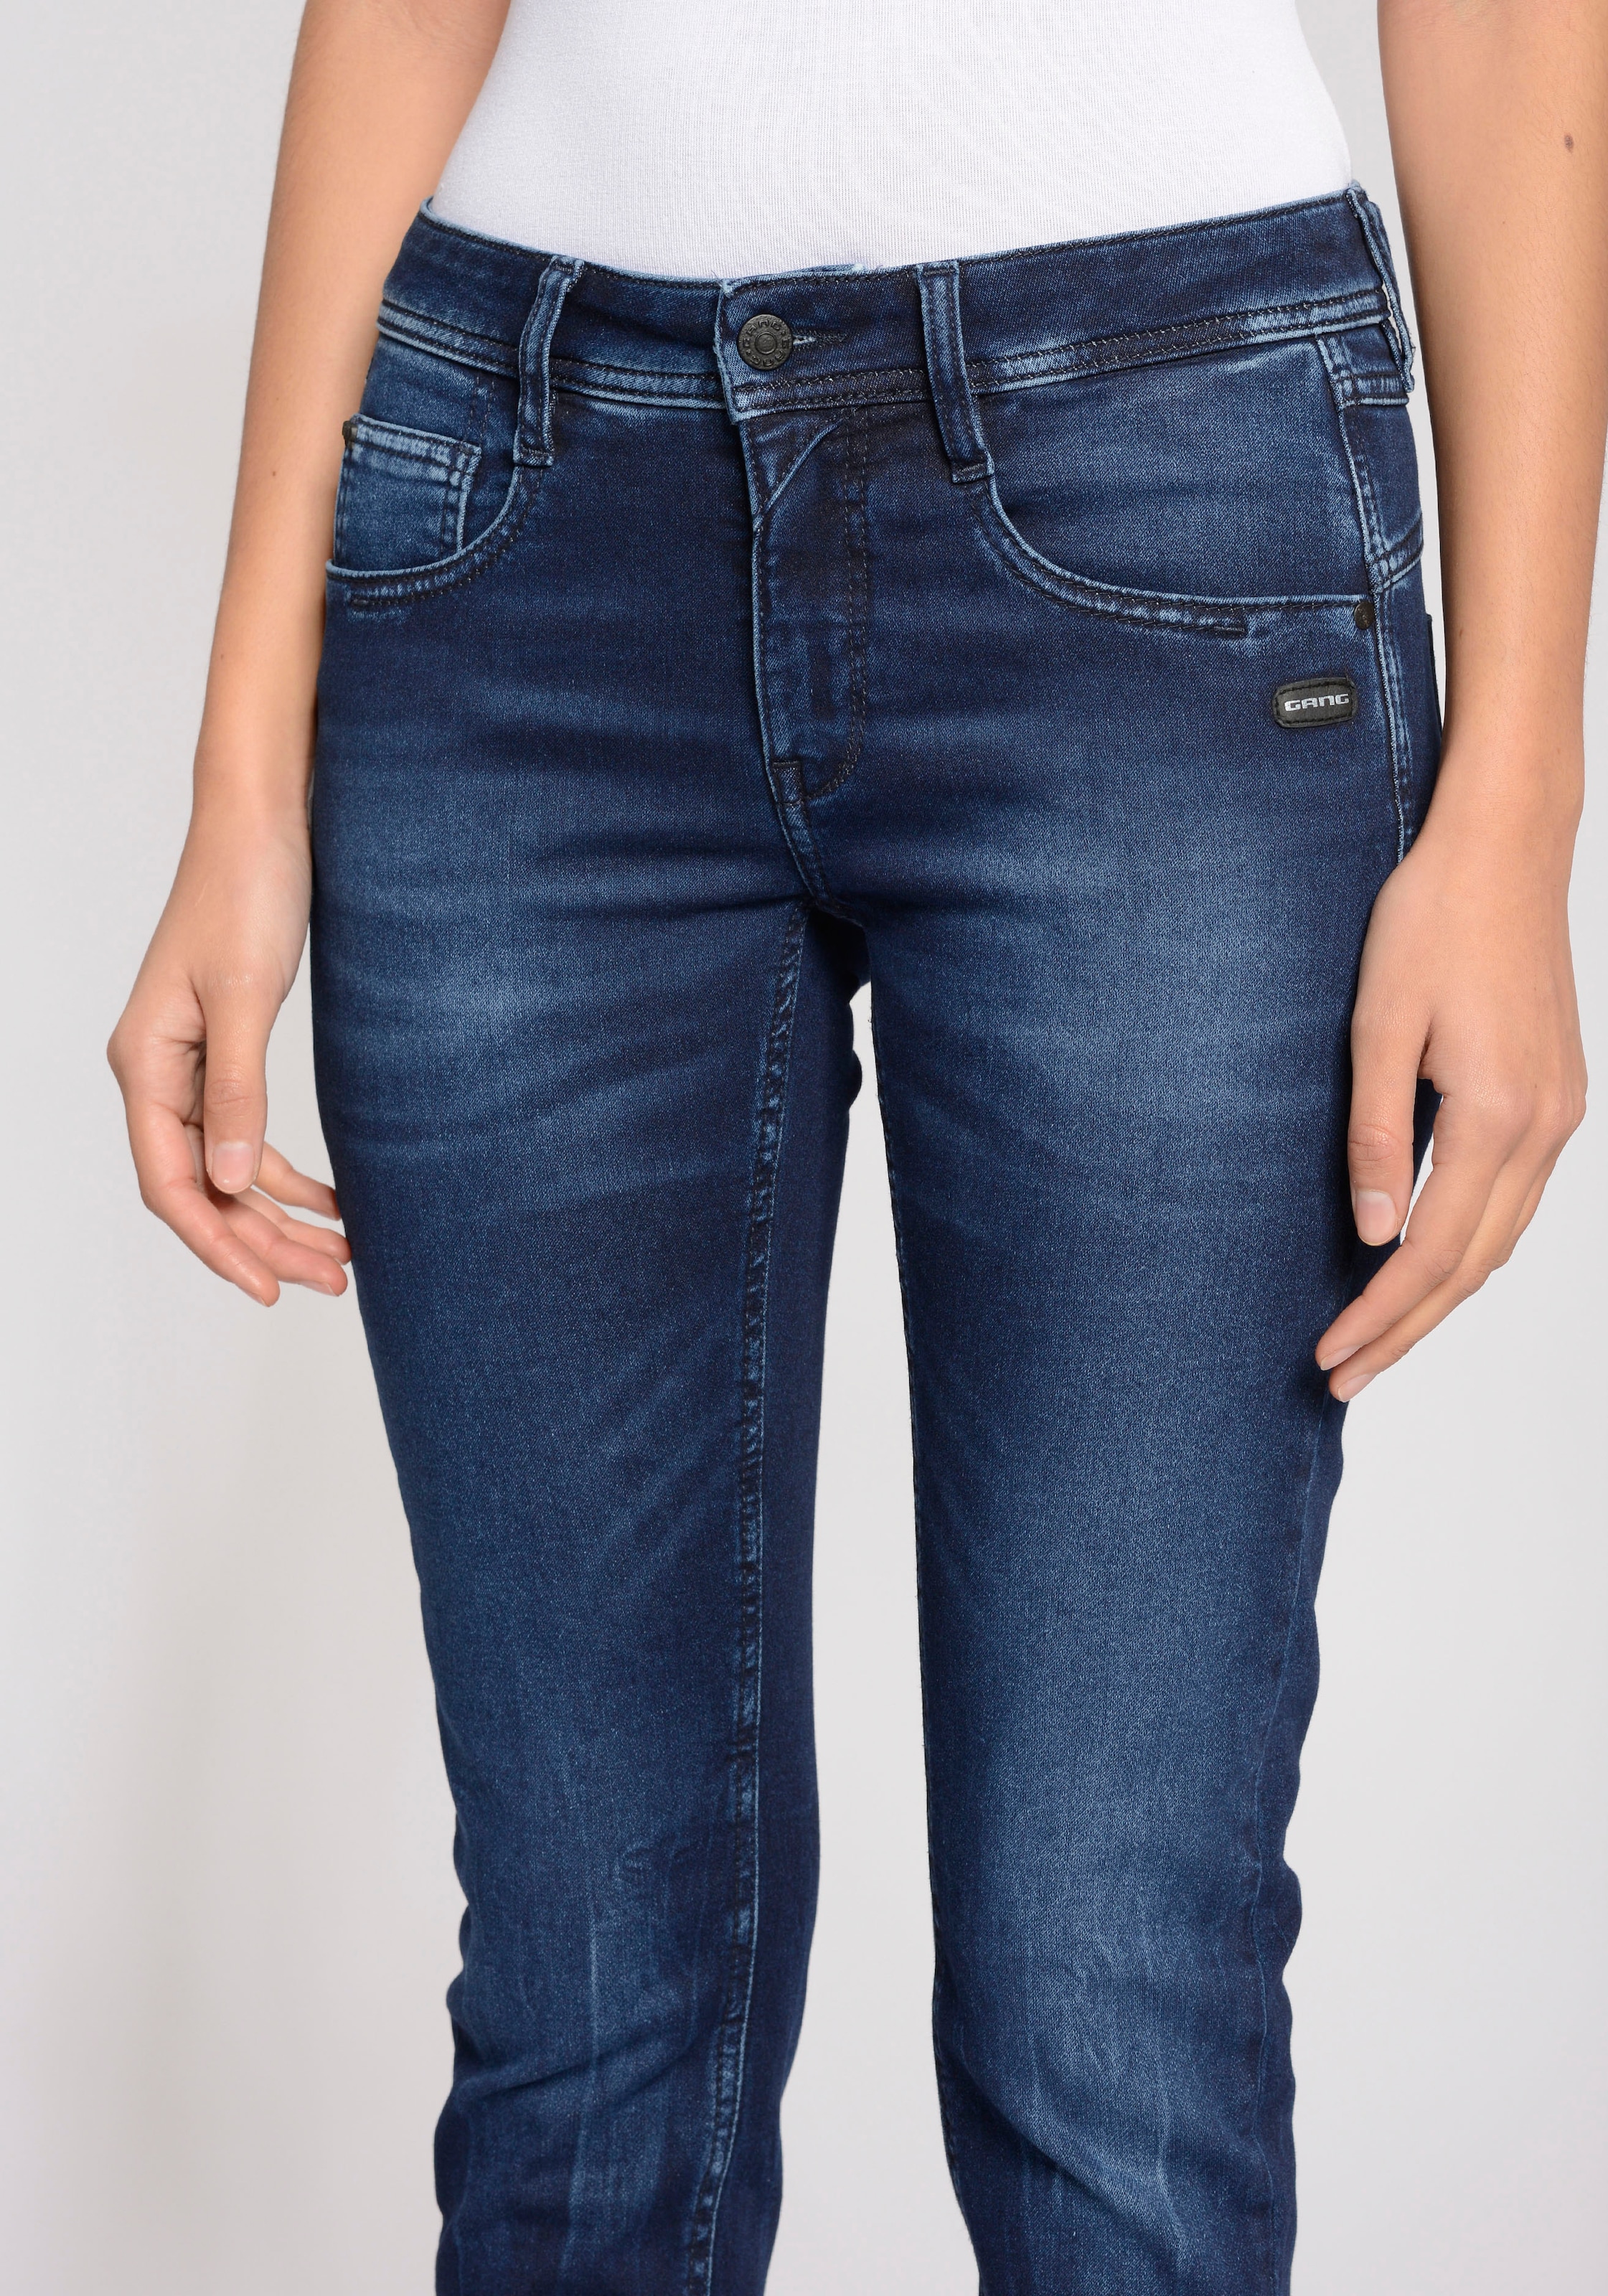 GANG Relax-fit-Jeans »94Amelie Cropped« OTTO kaufen bei